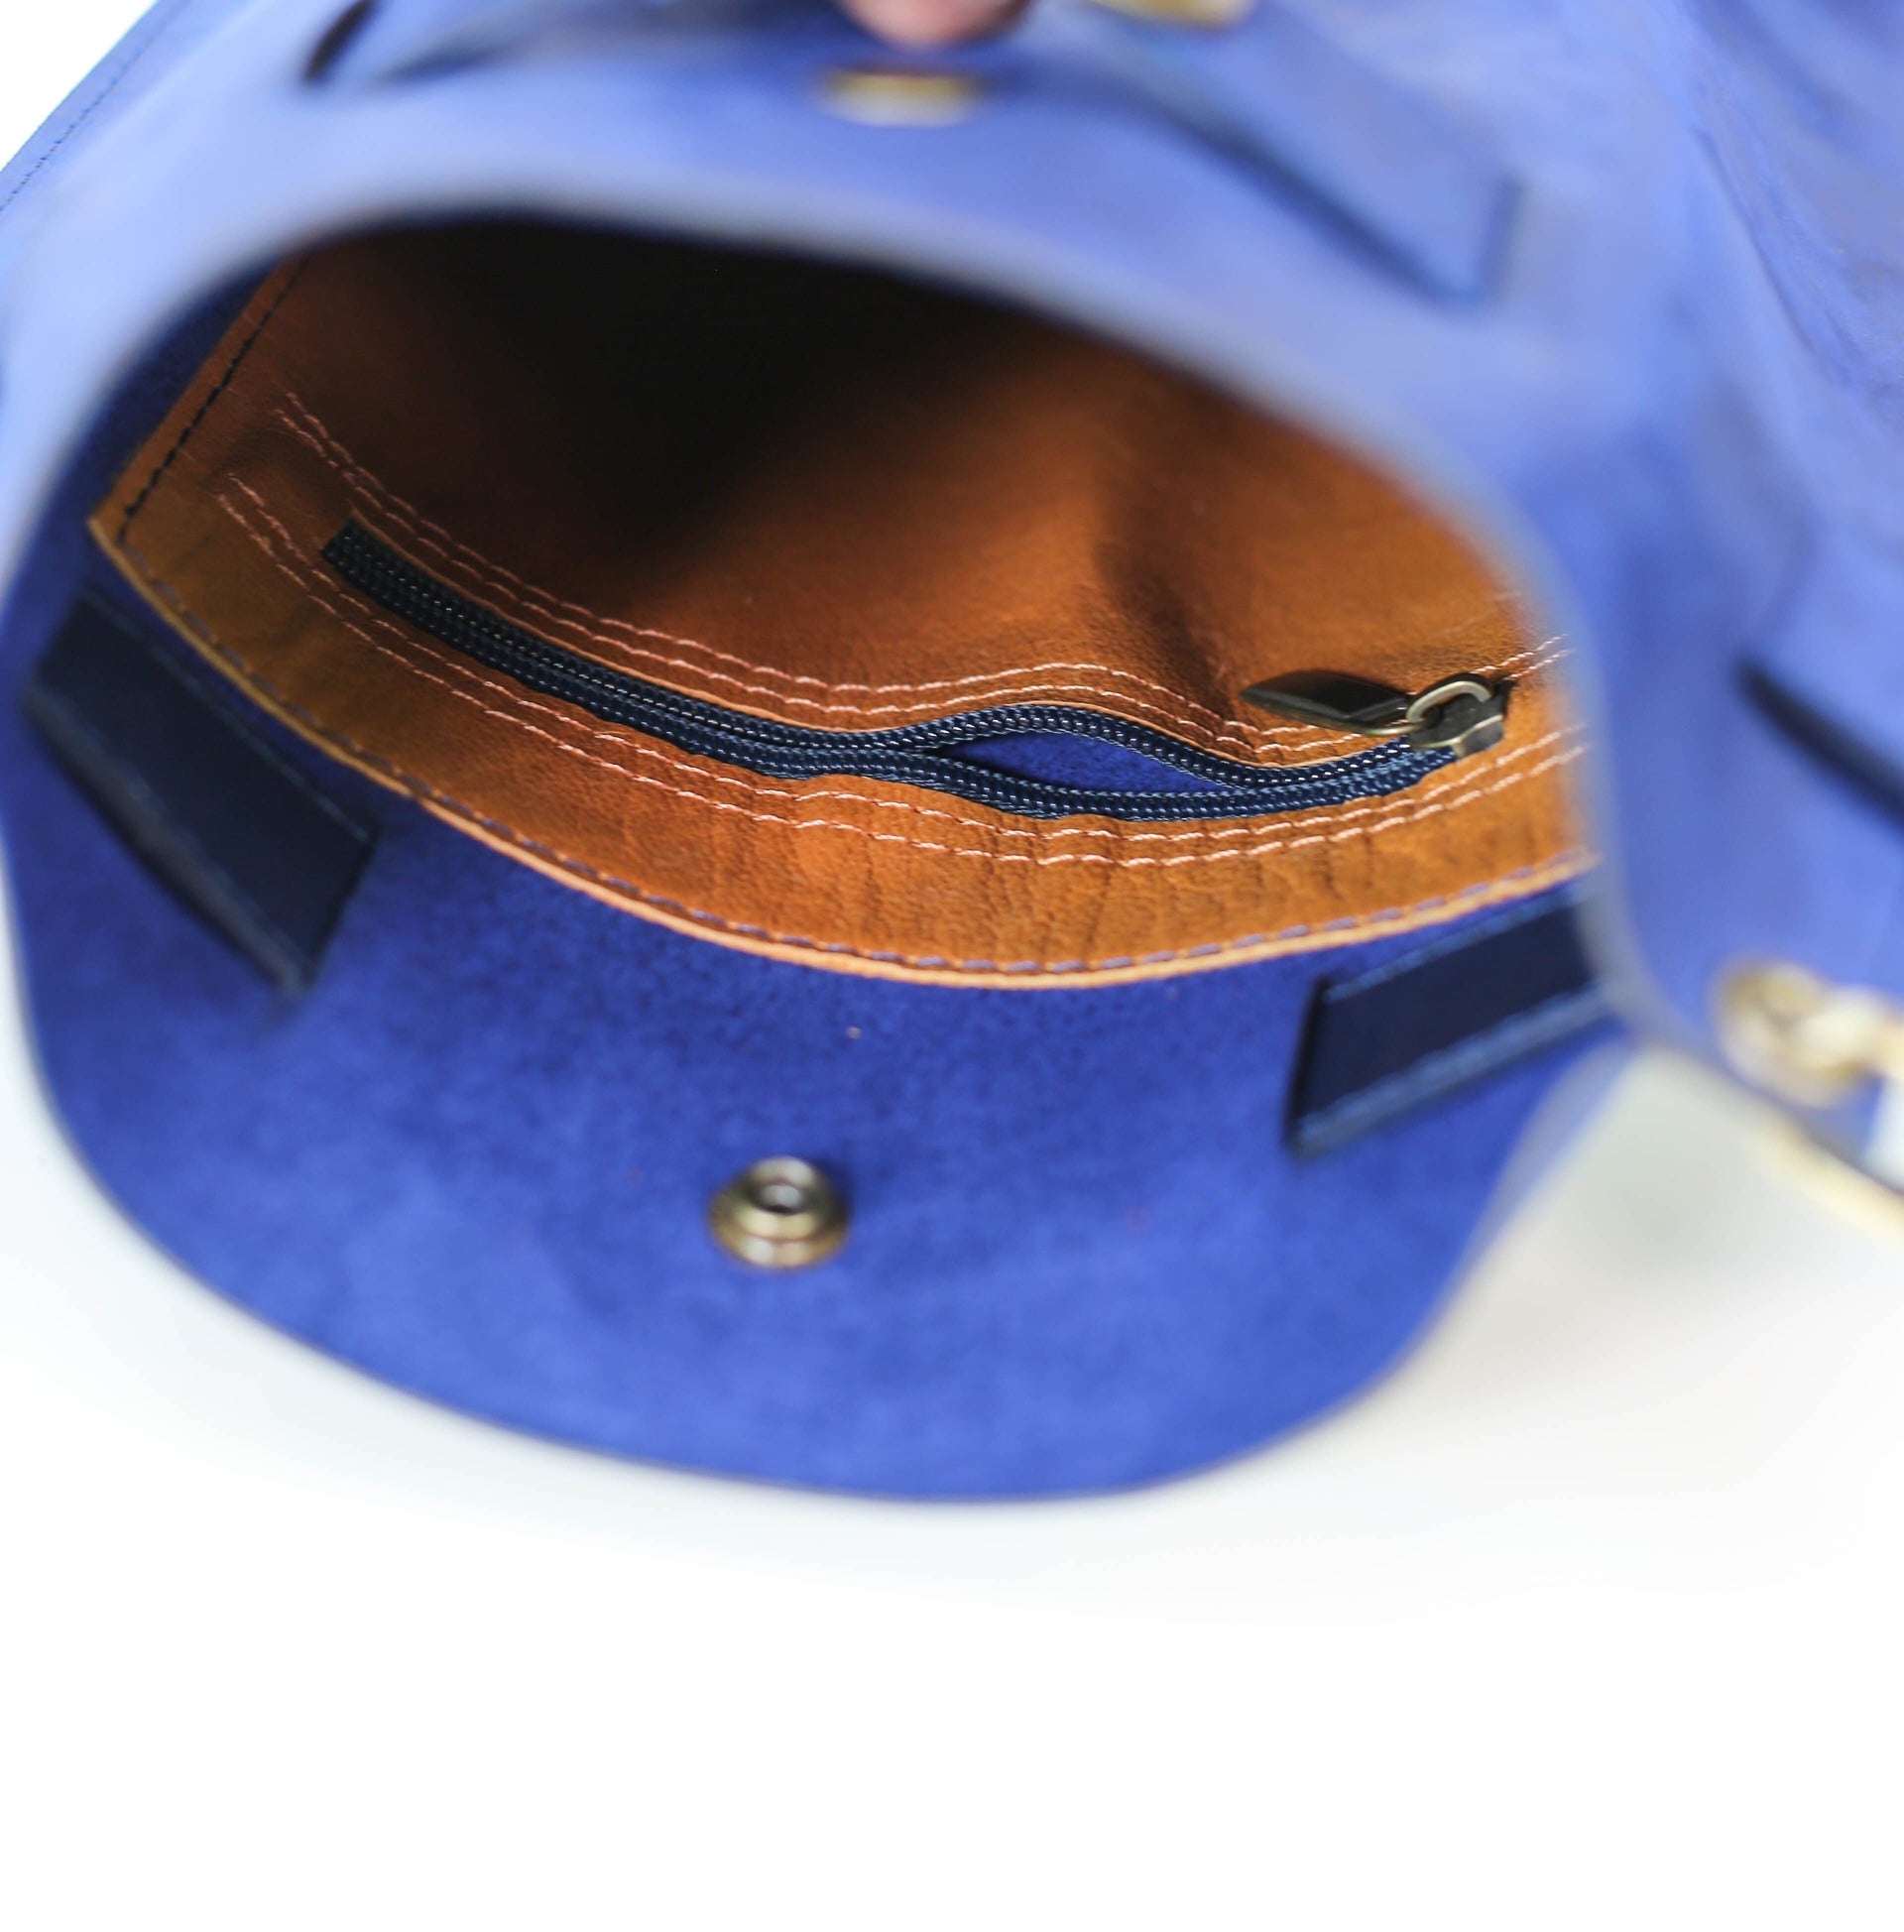 Interior of a blue leather bag